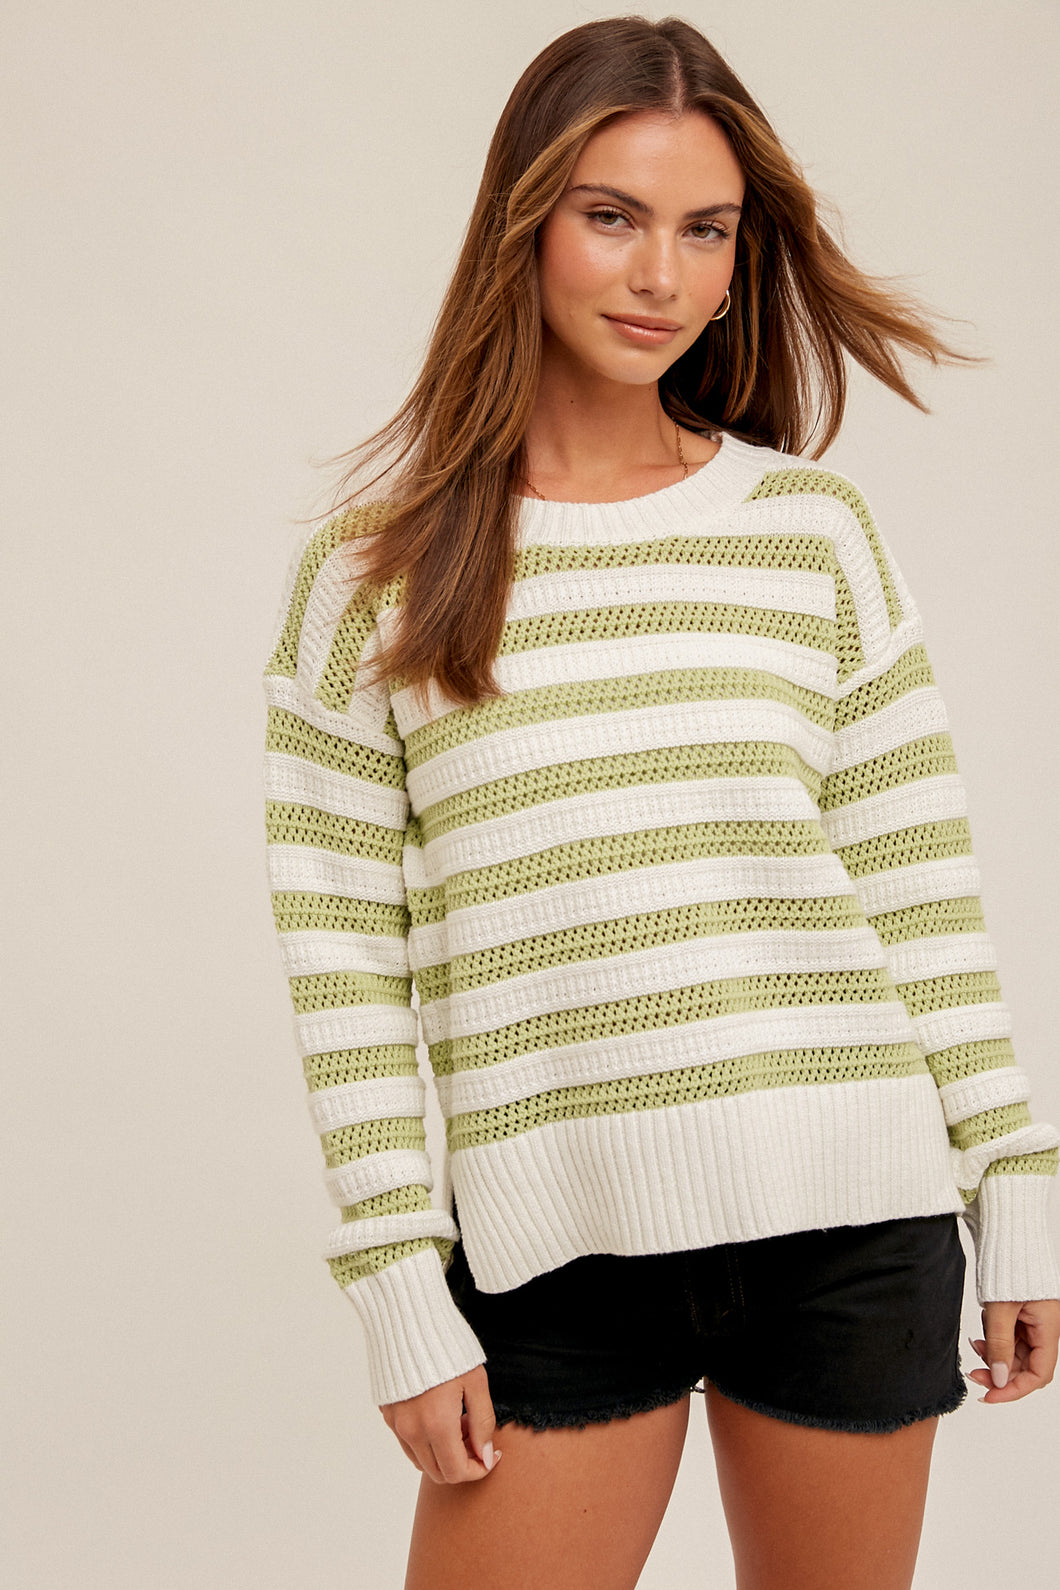 The Madeline Striped Sweater